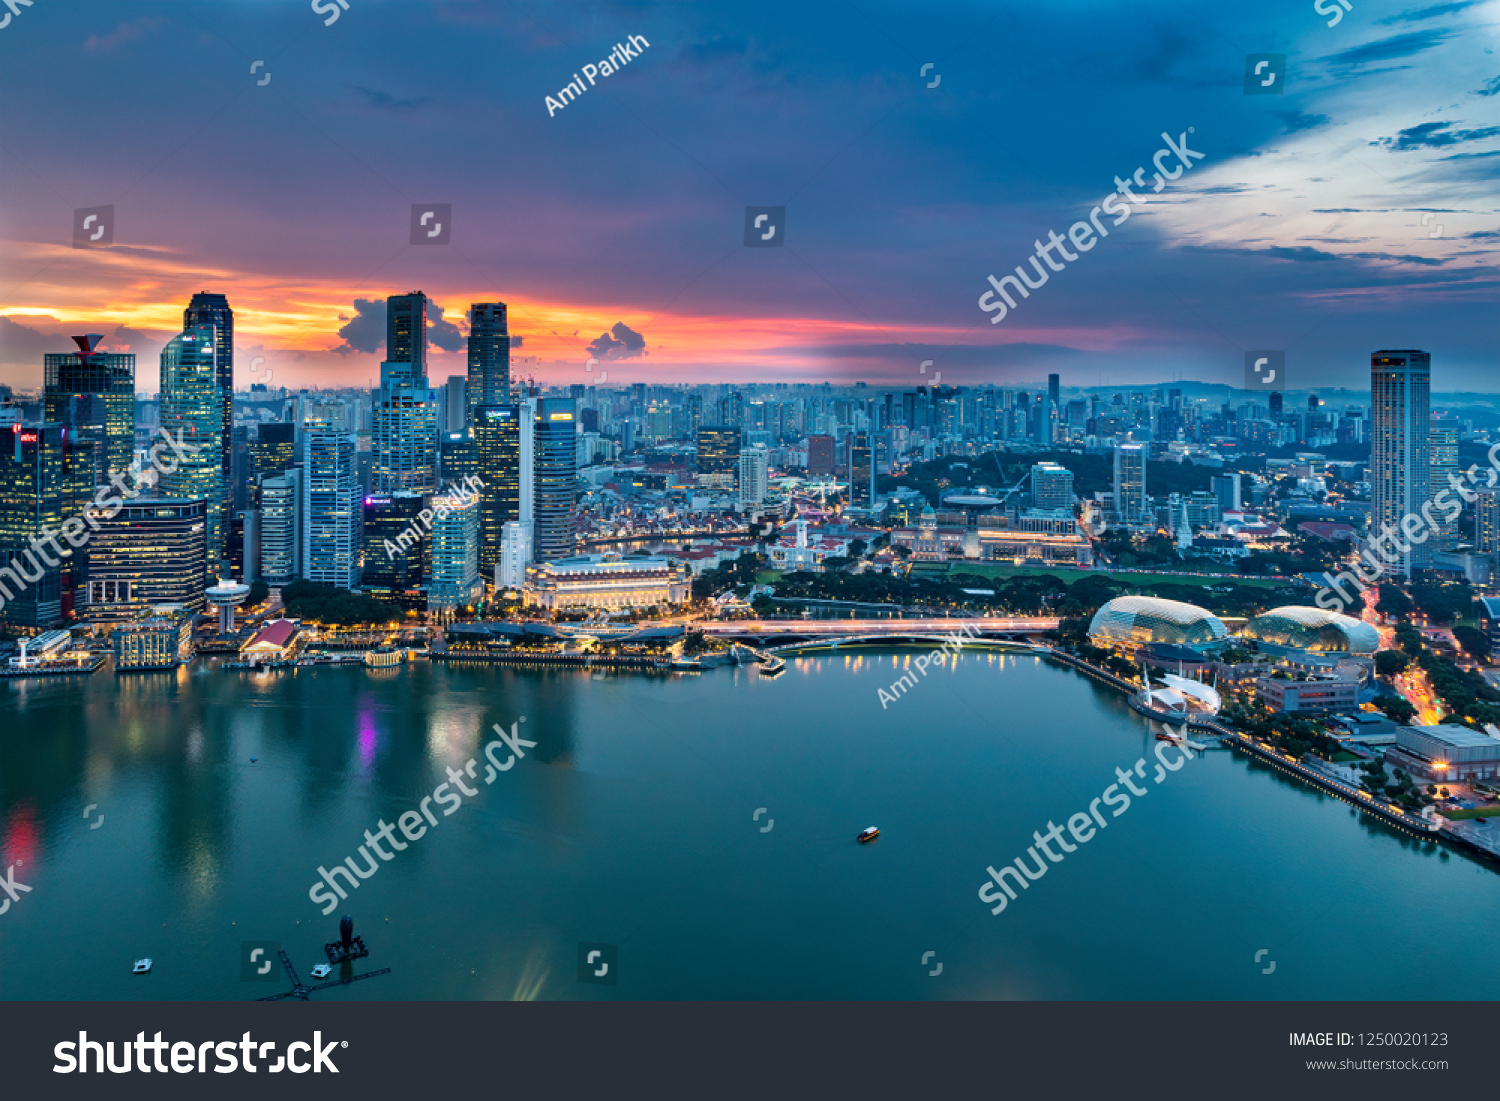 Singapore, Singapore - November 20, 2018:Sunset View of the Singapore Skyline from the Marina Bay Sands Hotel, on November 20, 2018 in Singapore #1250020123